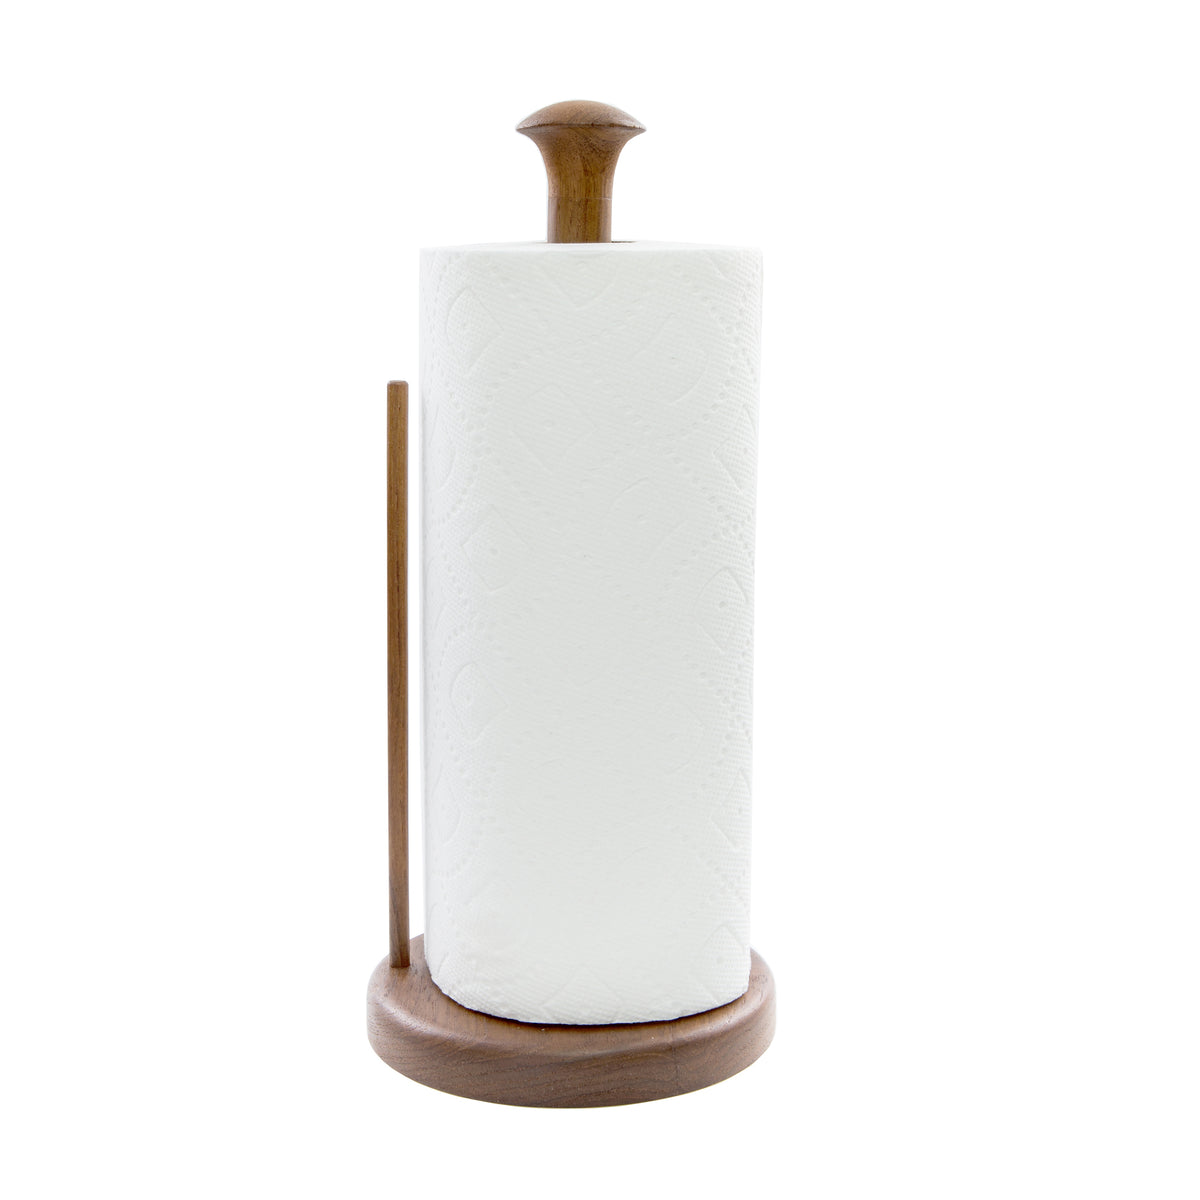 Stand-Up Paper Towel Holder - 62444